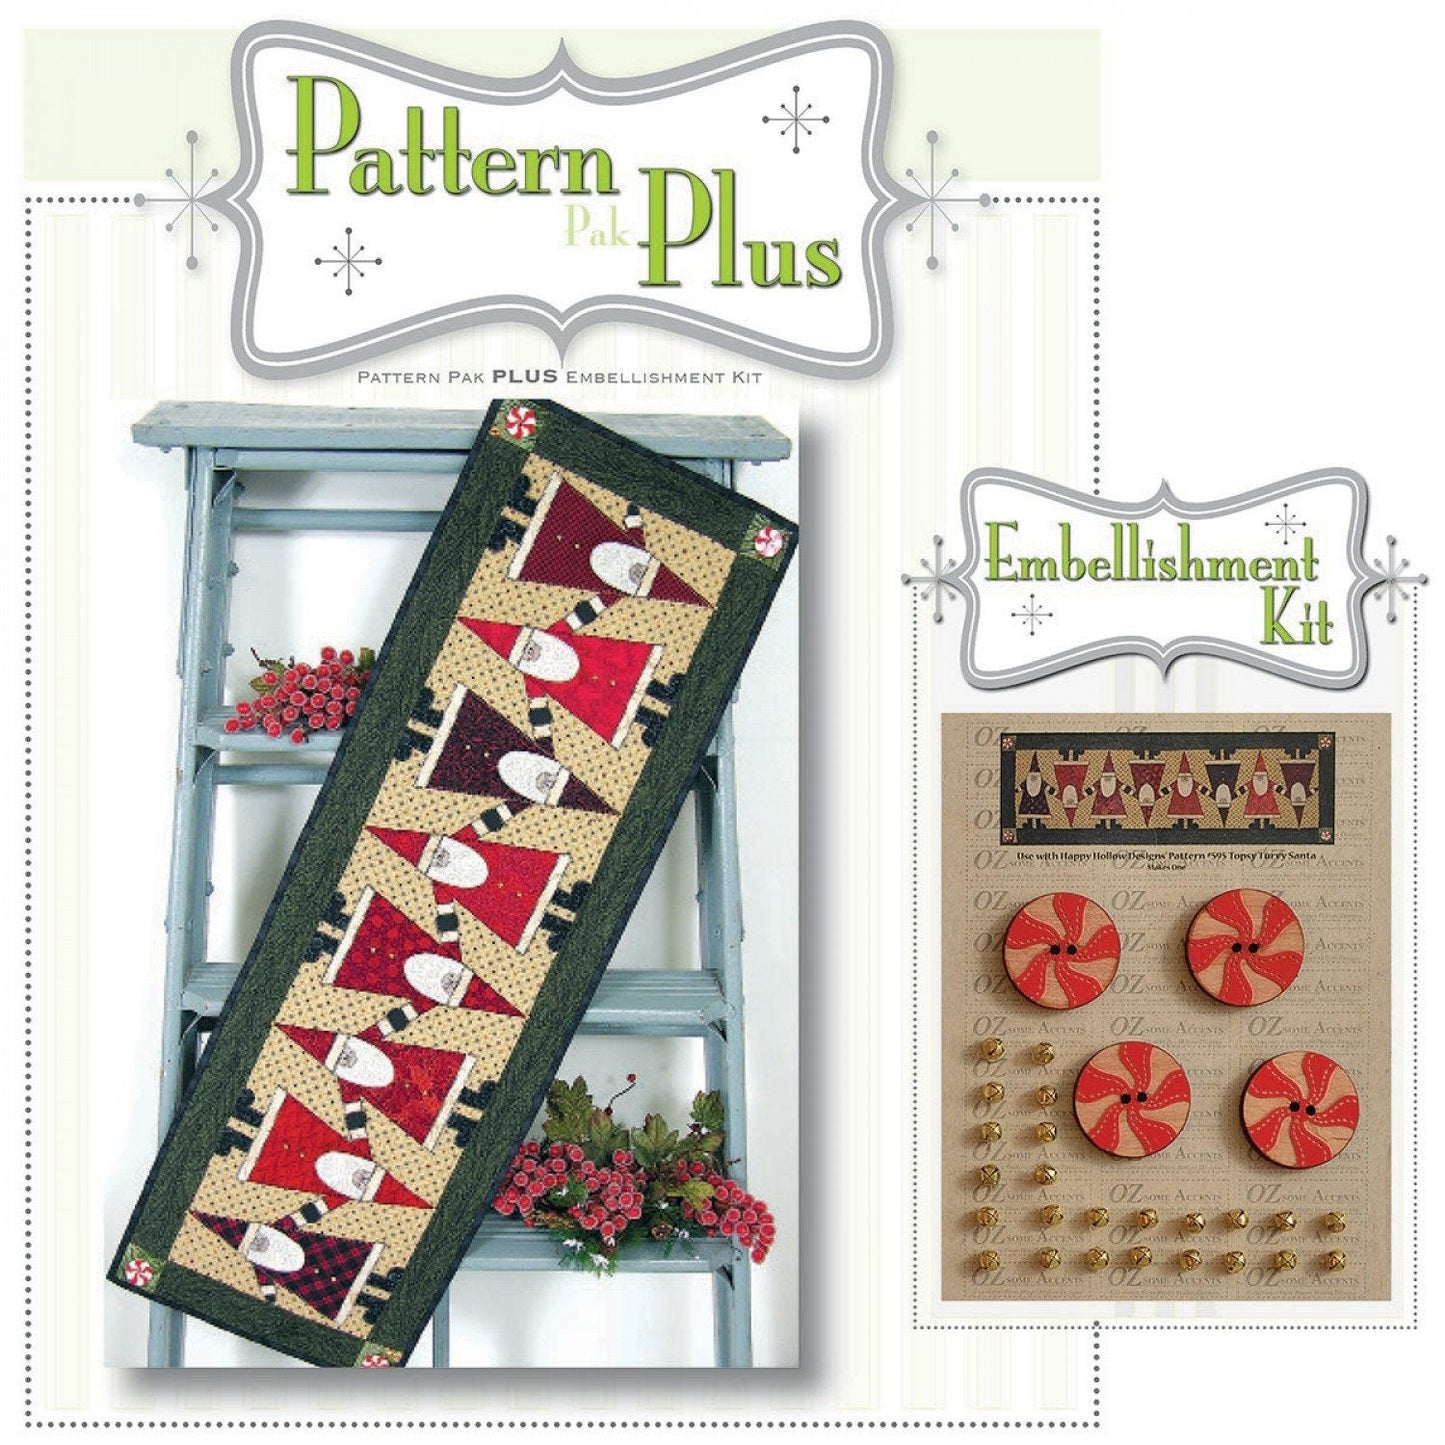 Topsy Turvy Santa Pattern - Christmas Table Runner or Wall Decor Applique Project